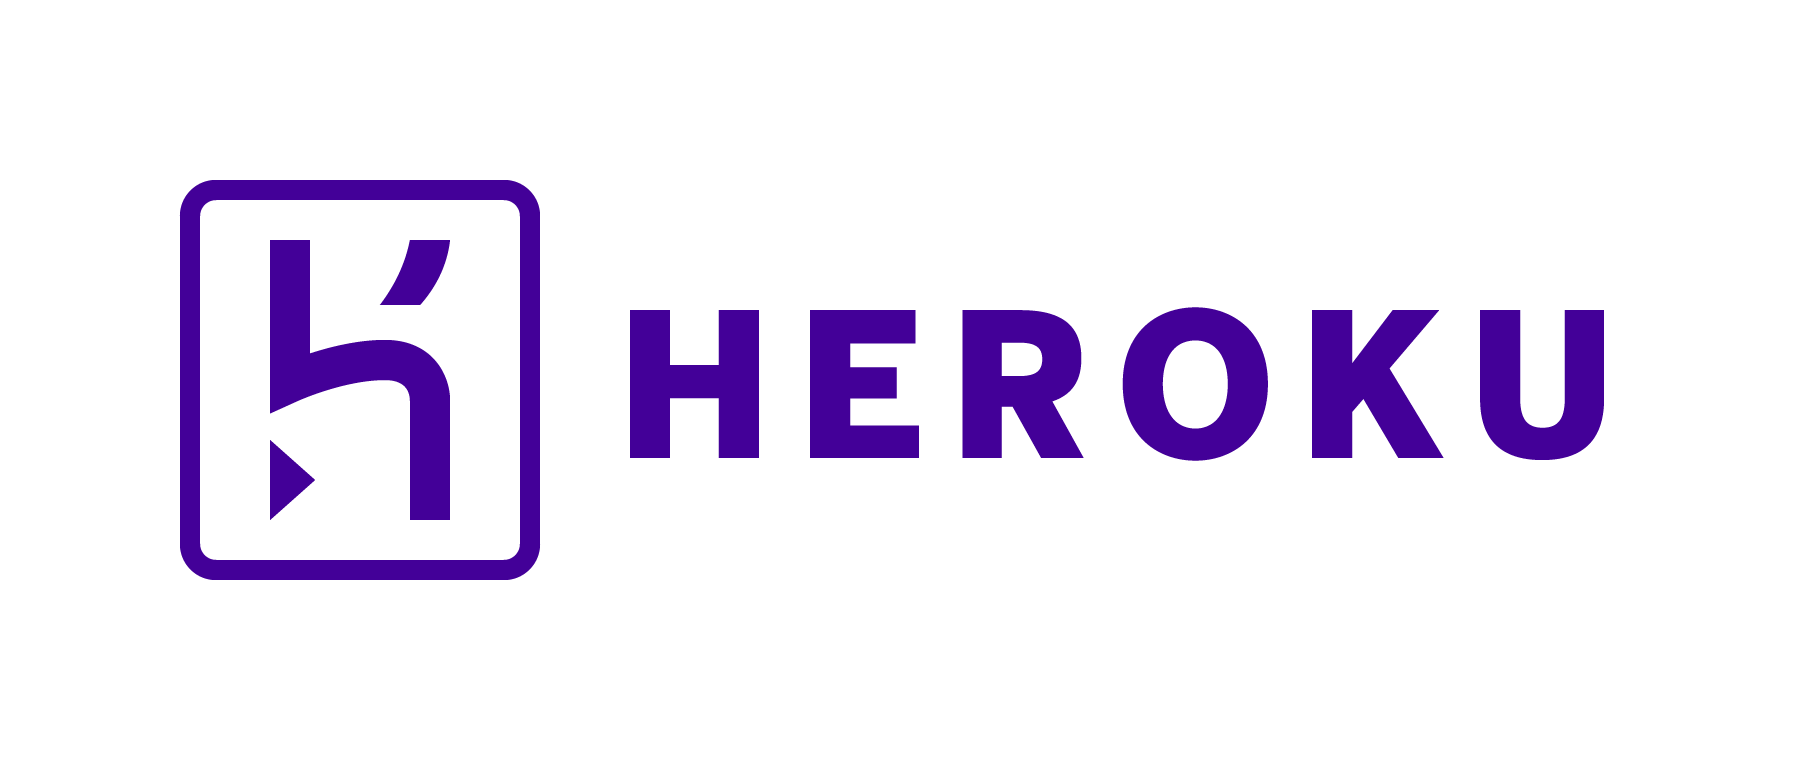 How I operated as a Staff Engineer at Heroku